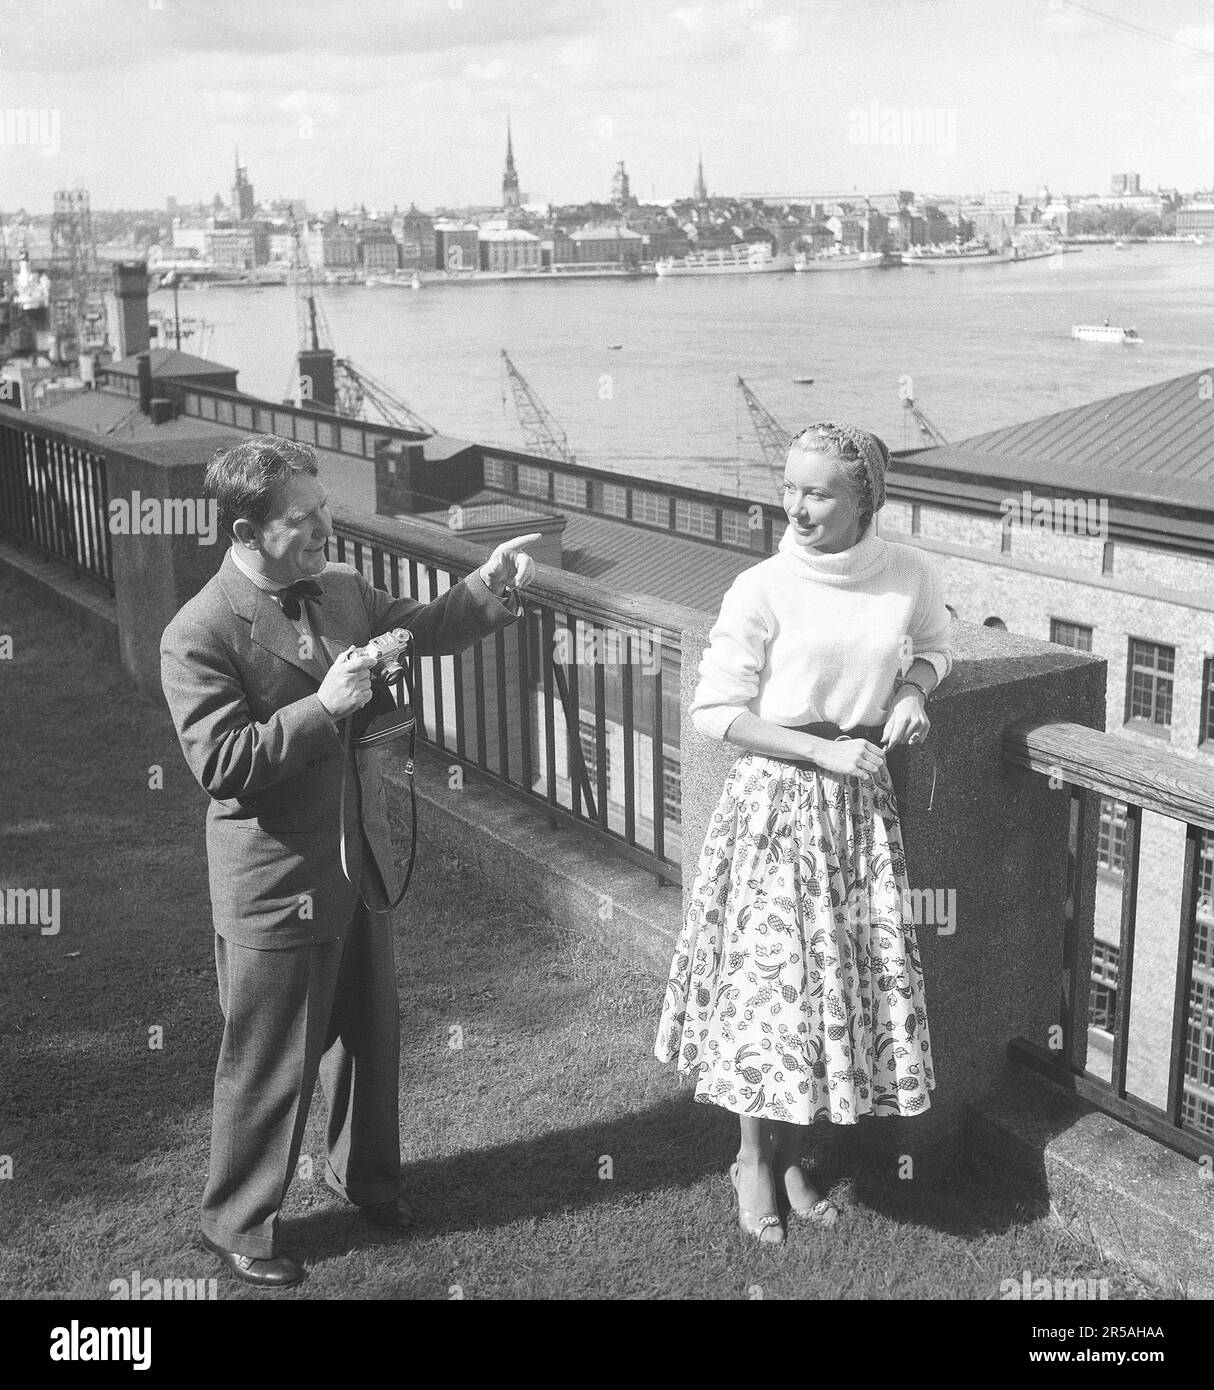 Amateur photographer in the 1950s. A couple of tourists in Stockholm and the man stands with his camera and wants to immortalize his partner with Stockholm's stream in the background. She is dressed in a period skirt and knitted jumper. He is american actor Burgess Meredith taking a picture of his swedish wife Kaja Sundsten.  Sweden 1954. Photo Kristoffersson Ref BF78-1 Stock Photo